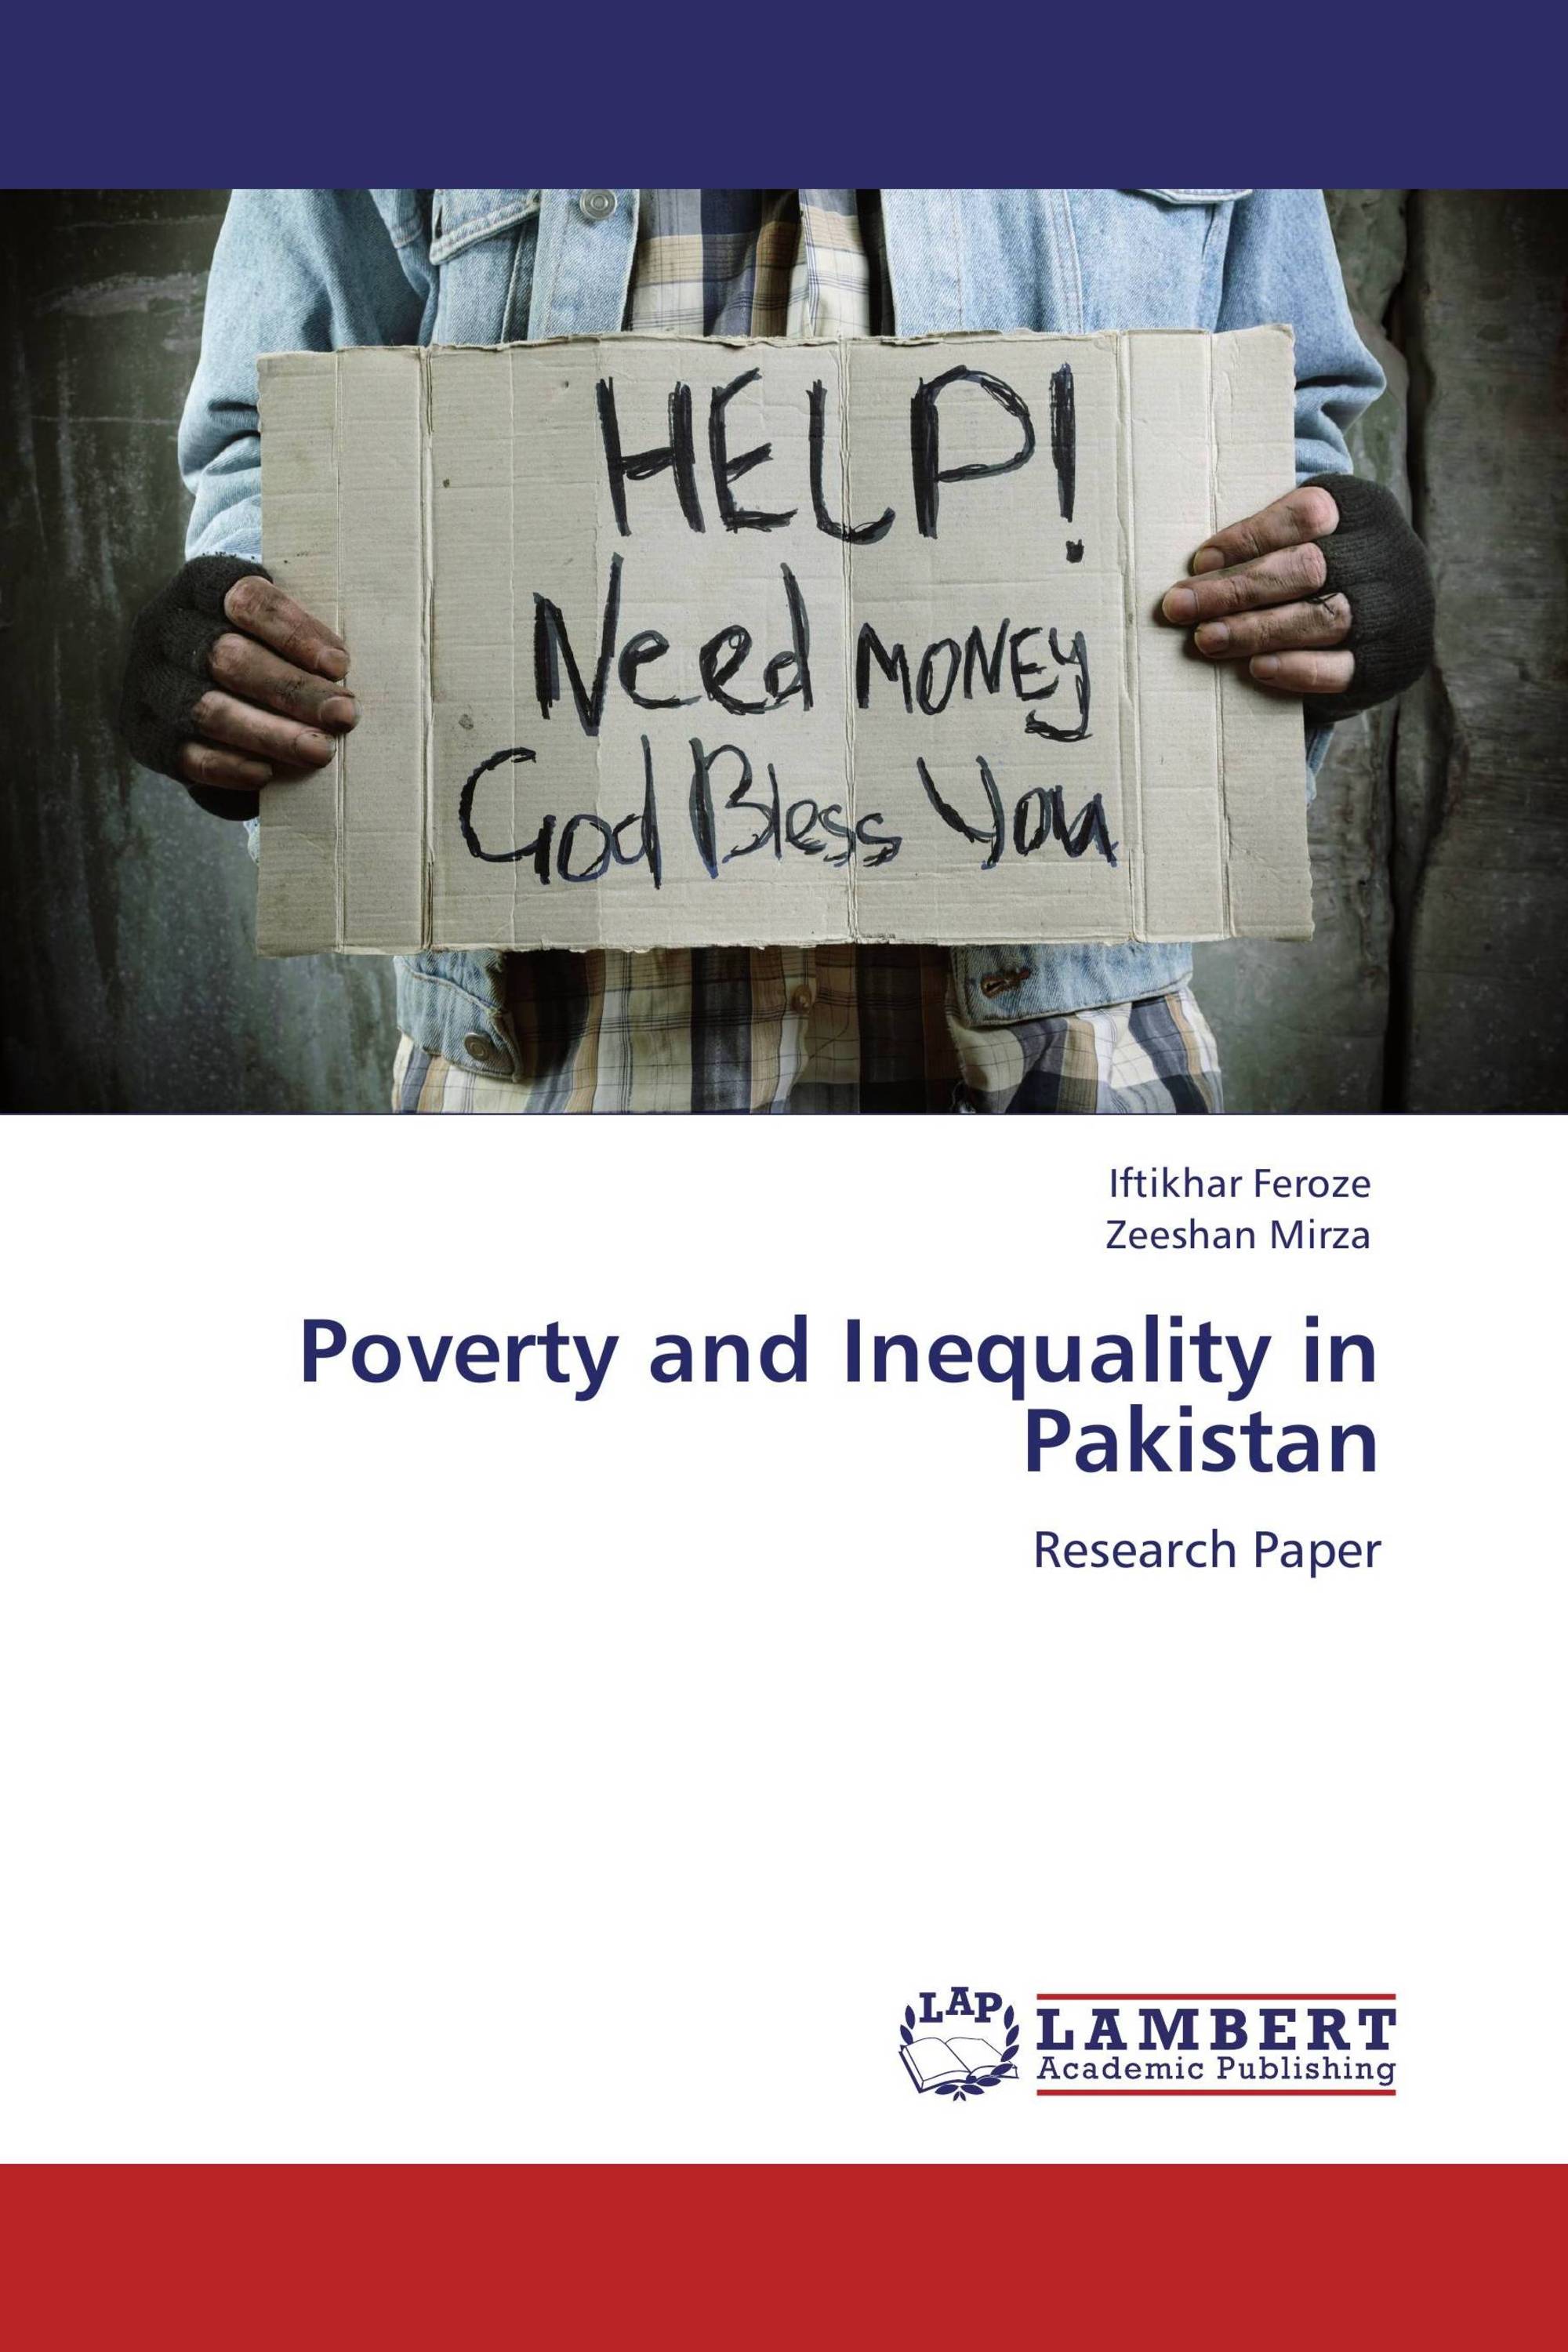 poverty in pakistan essay with quotes